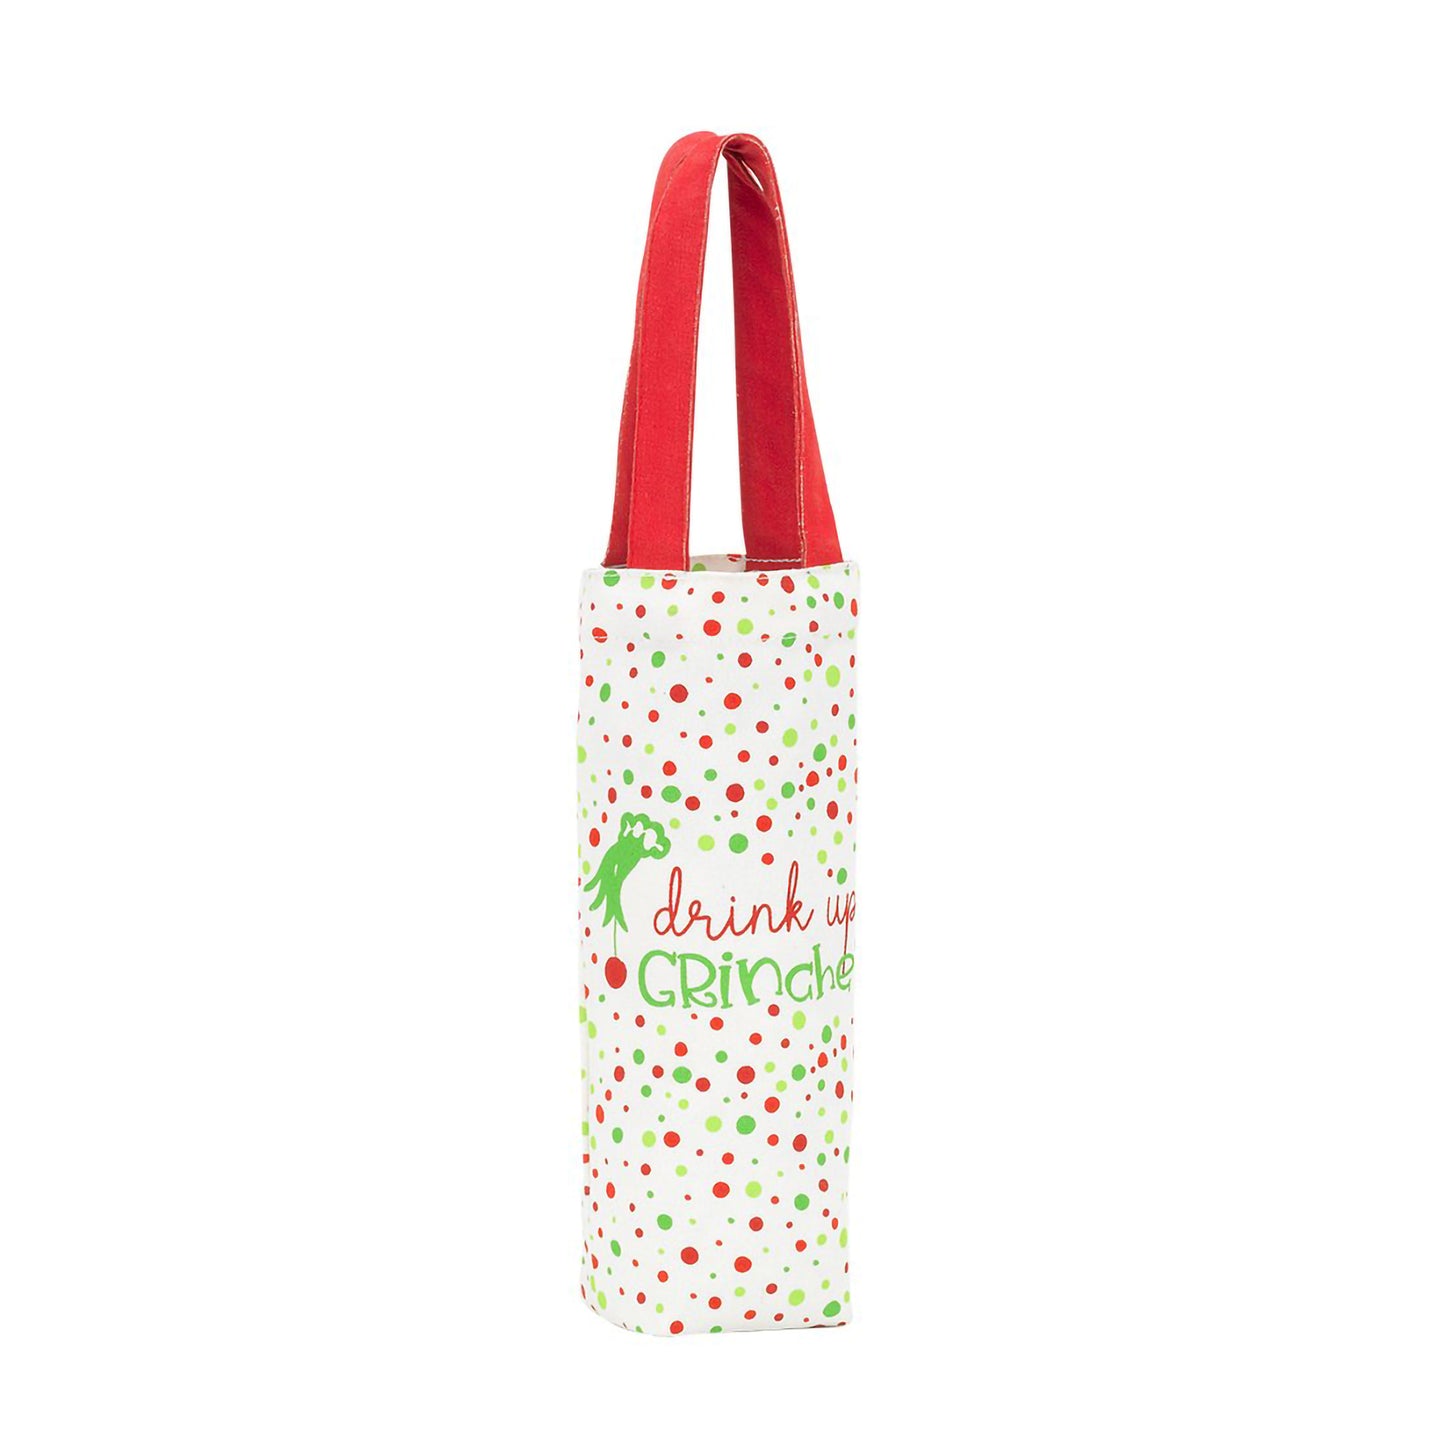 Drink Up Grinches Wine Bag